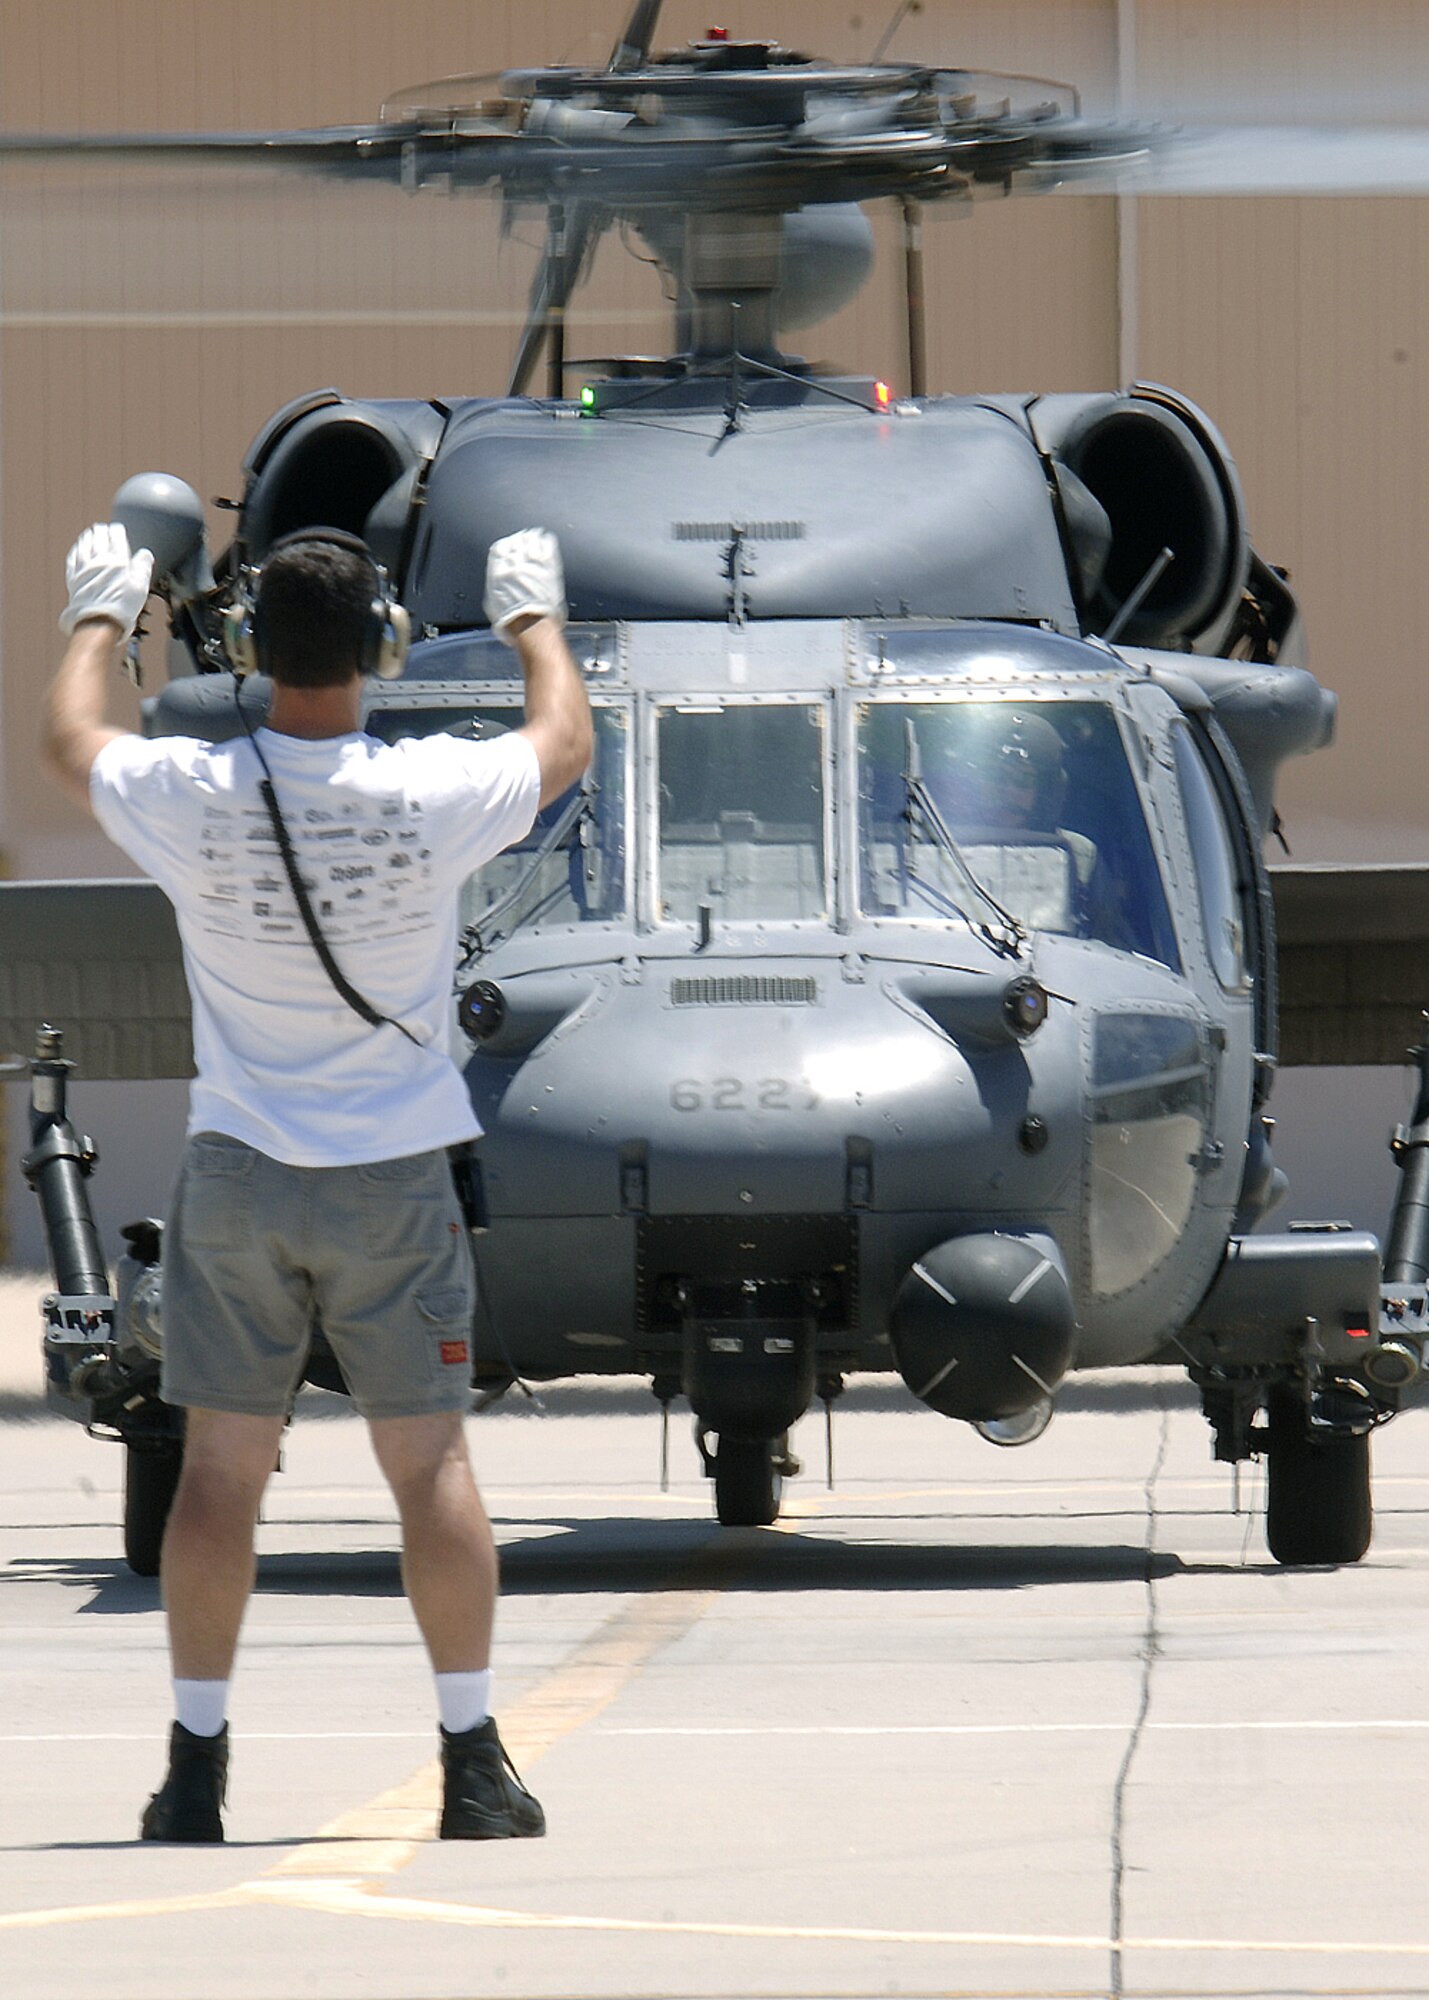 Tech. Sgt. Gregory Gaunt marshals an HH-60 Pave Hawk with Maj. John Keeler at the controls at Davis-Monthan Air Force Base, Ariz., on July 10. Major Keeler and Sergeant Guant were two of the Airmen who participated in a real-world rescue of an individual from a cargo ship off the coast of California on July 1. They are assigned to the Air Force Reserve Command's 943rd Rescue Squadron. (U.S Air Force photo/Senior Airman Christina D. Ponte)